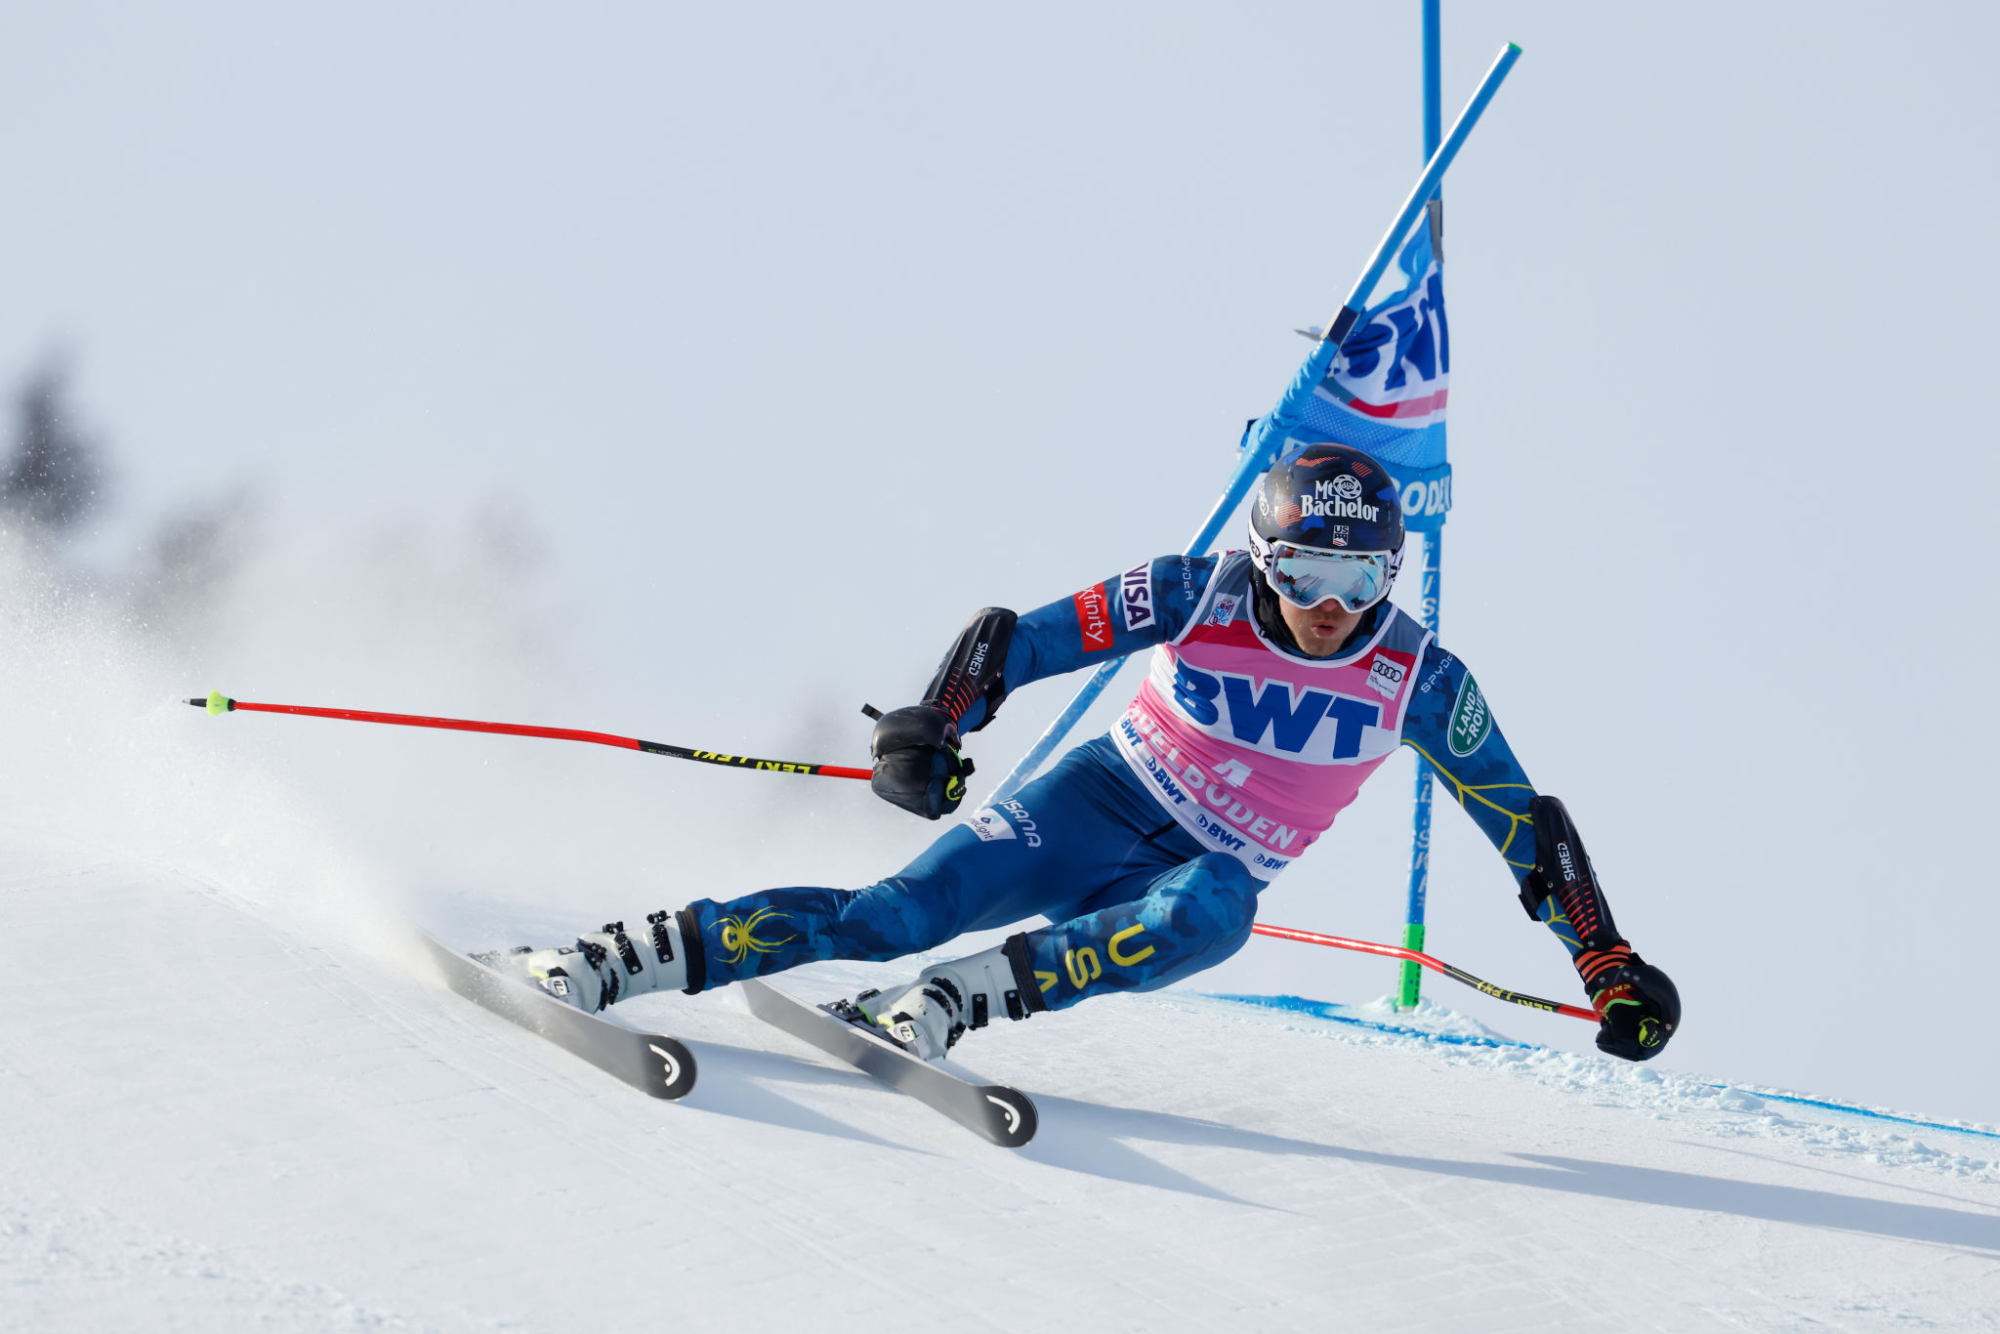 Tommy Ford competes in an FIS Alpine World Cup giant slalom race moments before crashing.